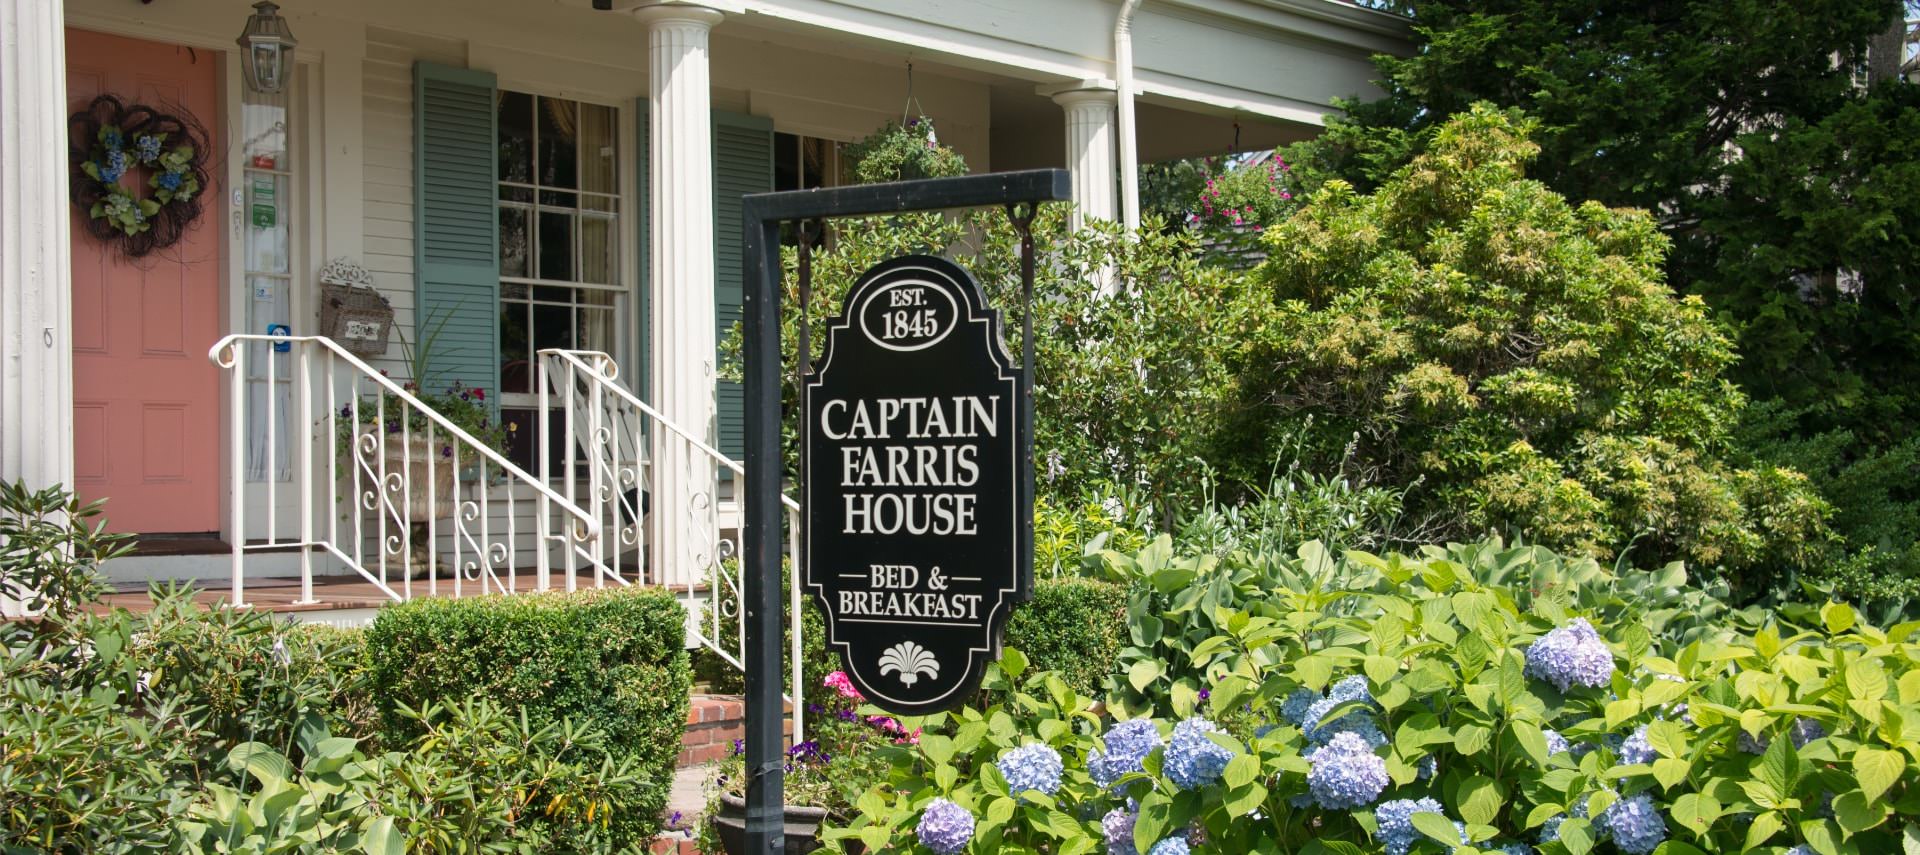 Front view of property with salmon-colored door and light turquoise shutters surrounded by shrubs, bushes, and flowers with a sign for Captain Farris House